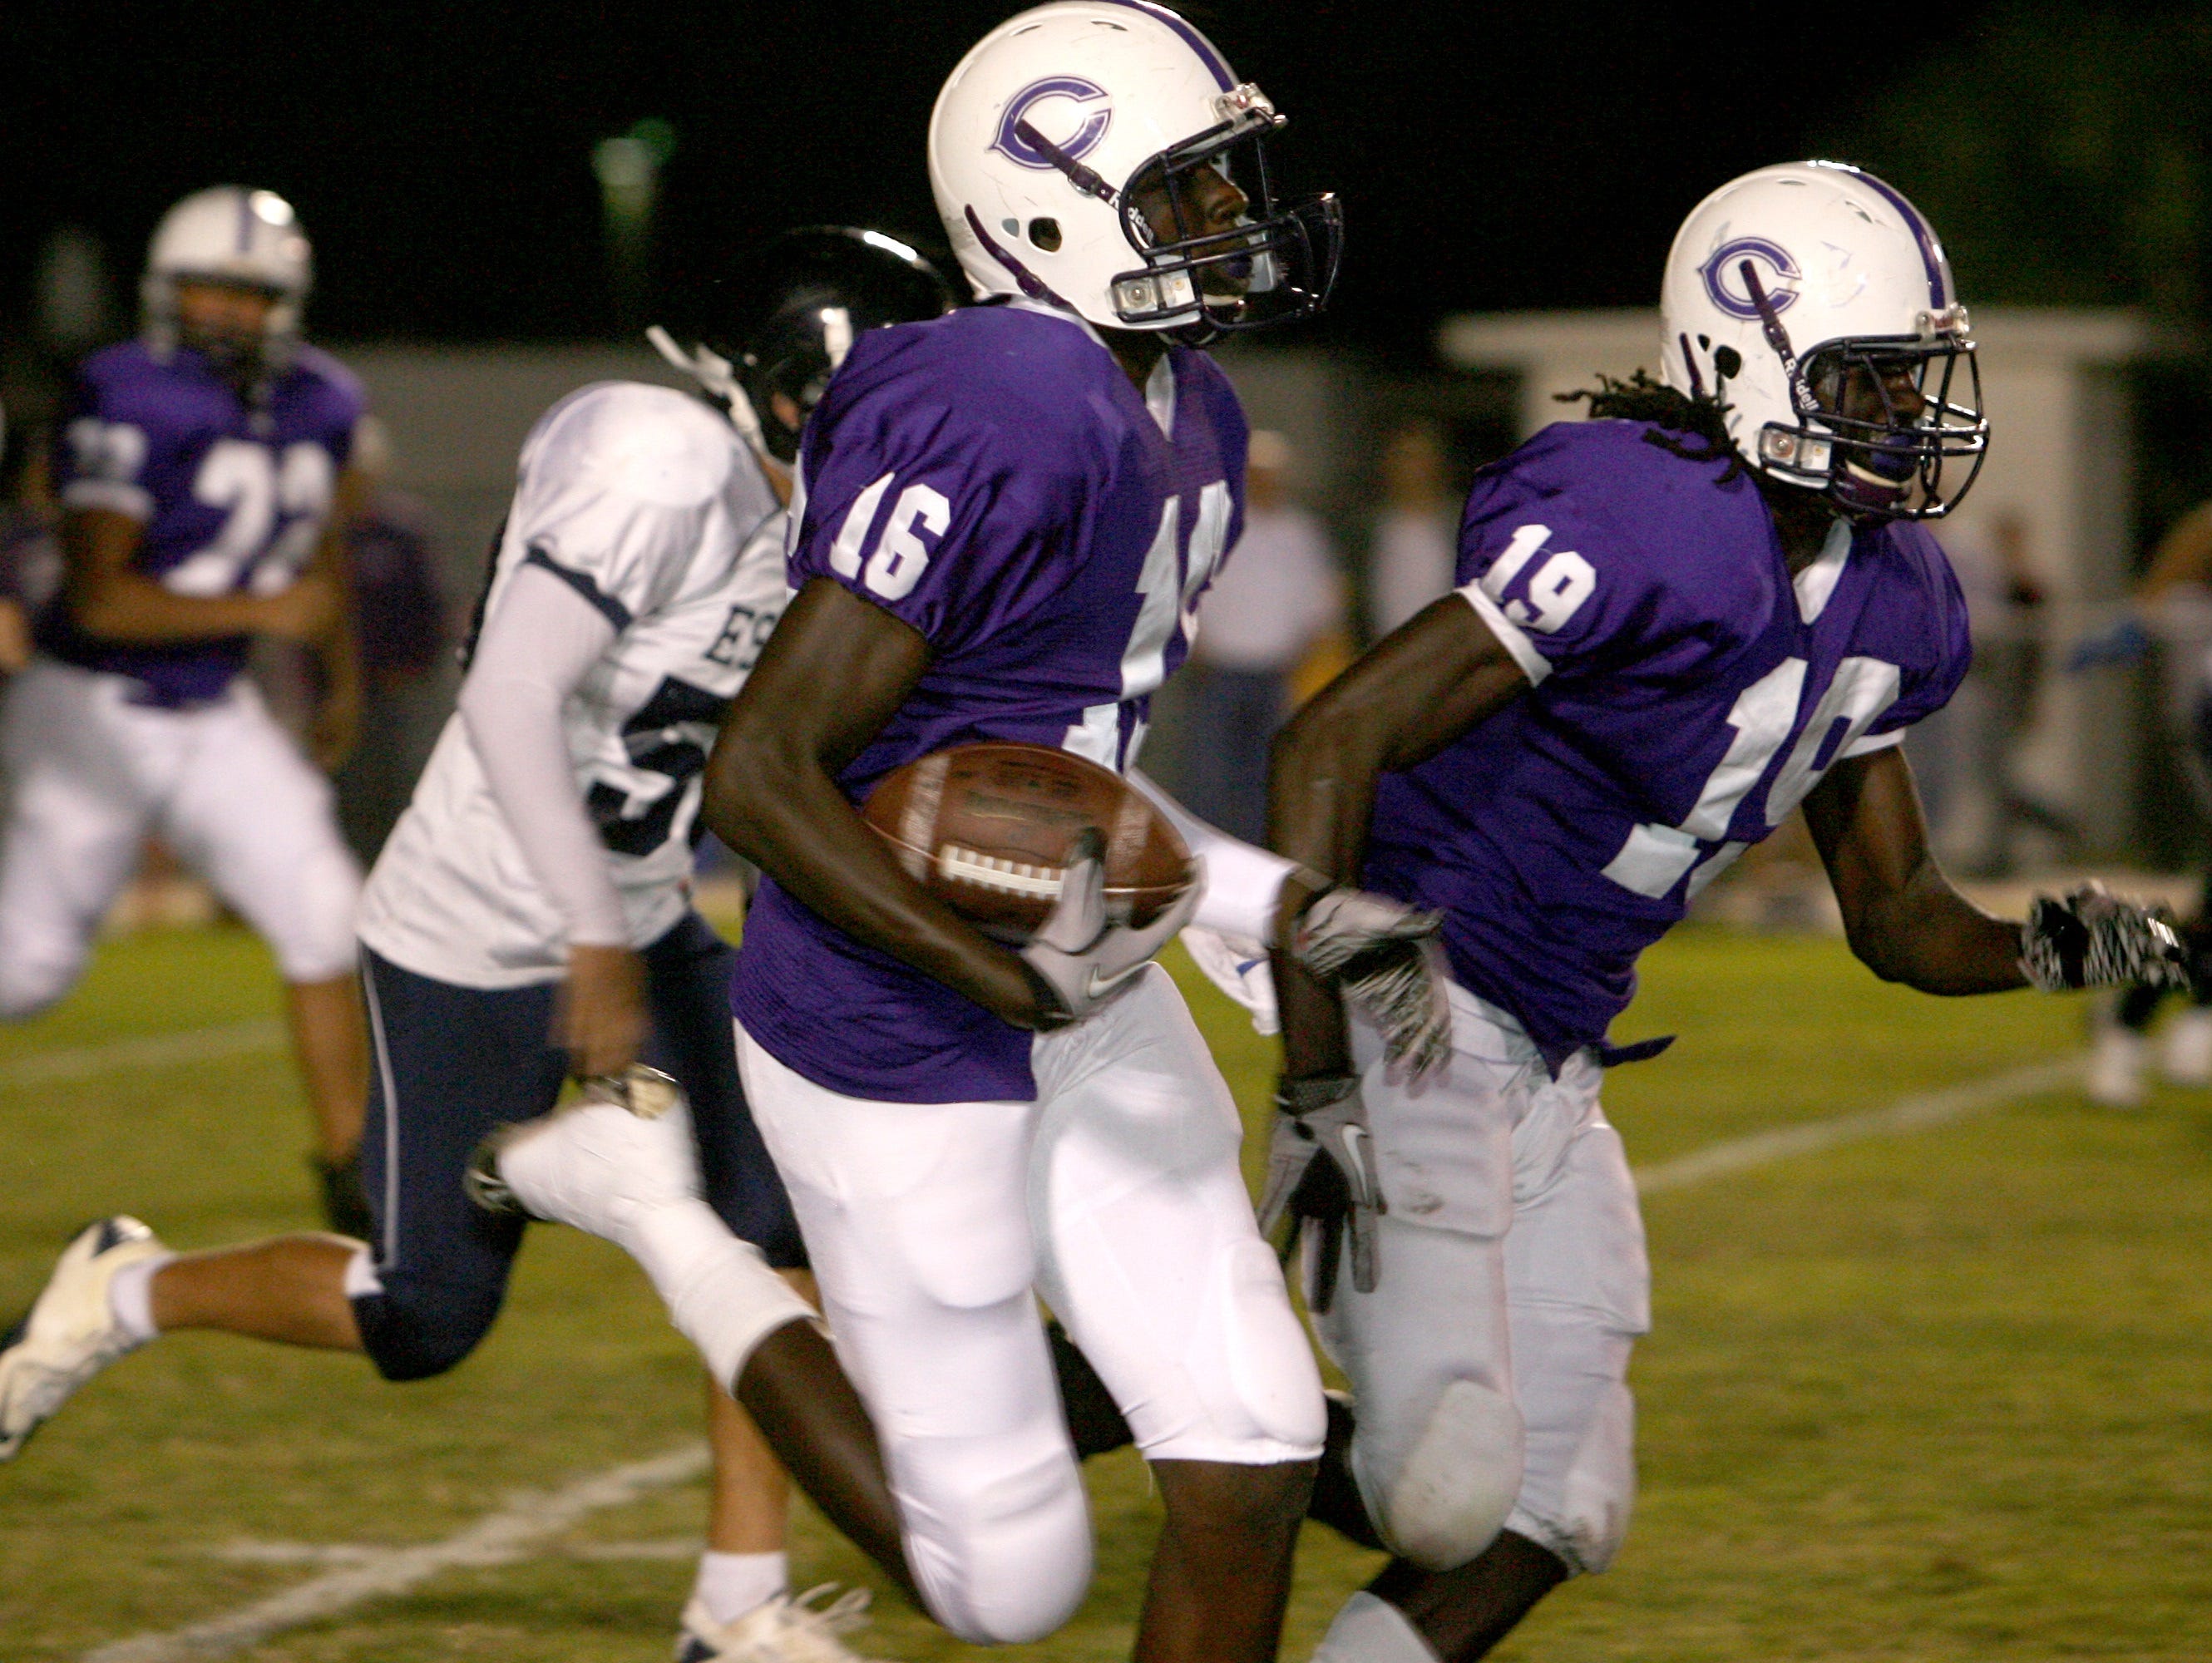 Cypress Lake's Jayron Kearse gets blocking from De'Vondre Campbell in a game from 2010.